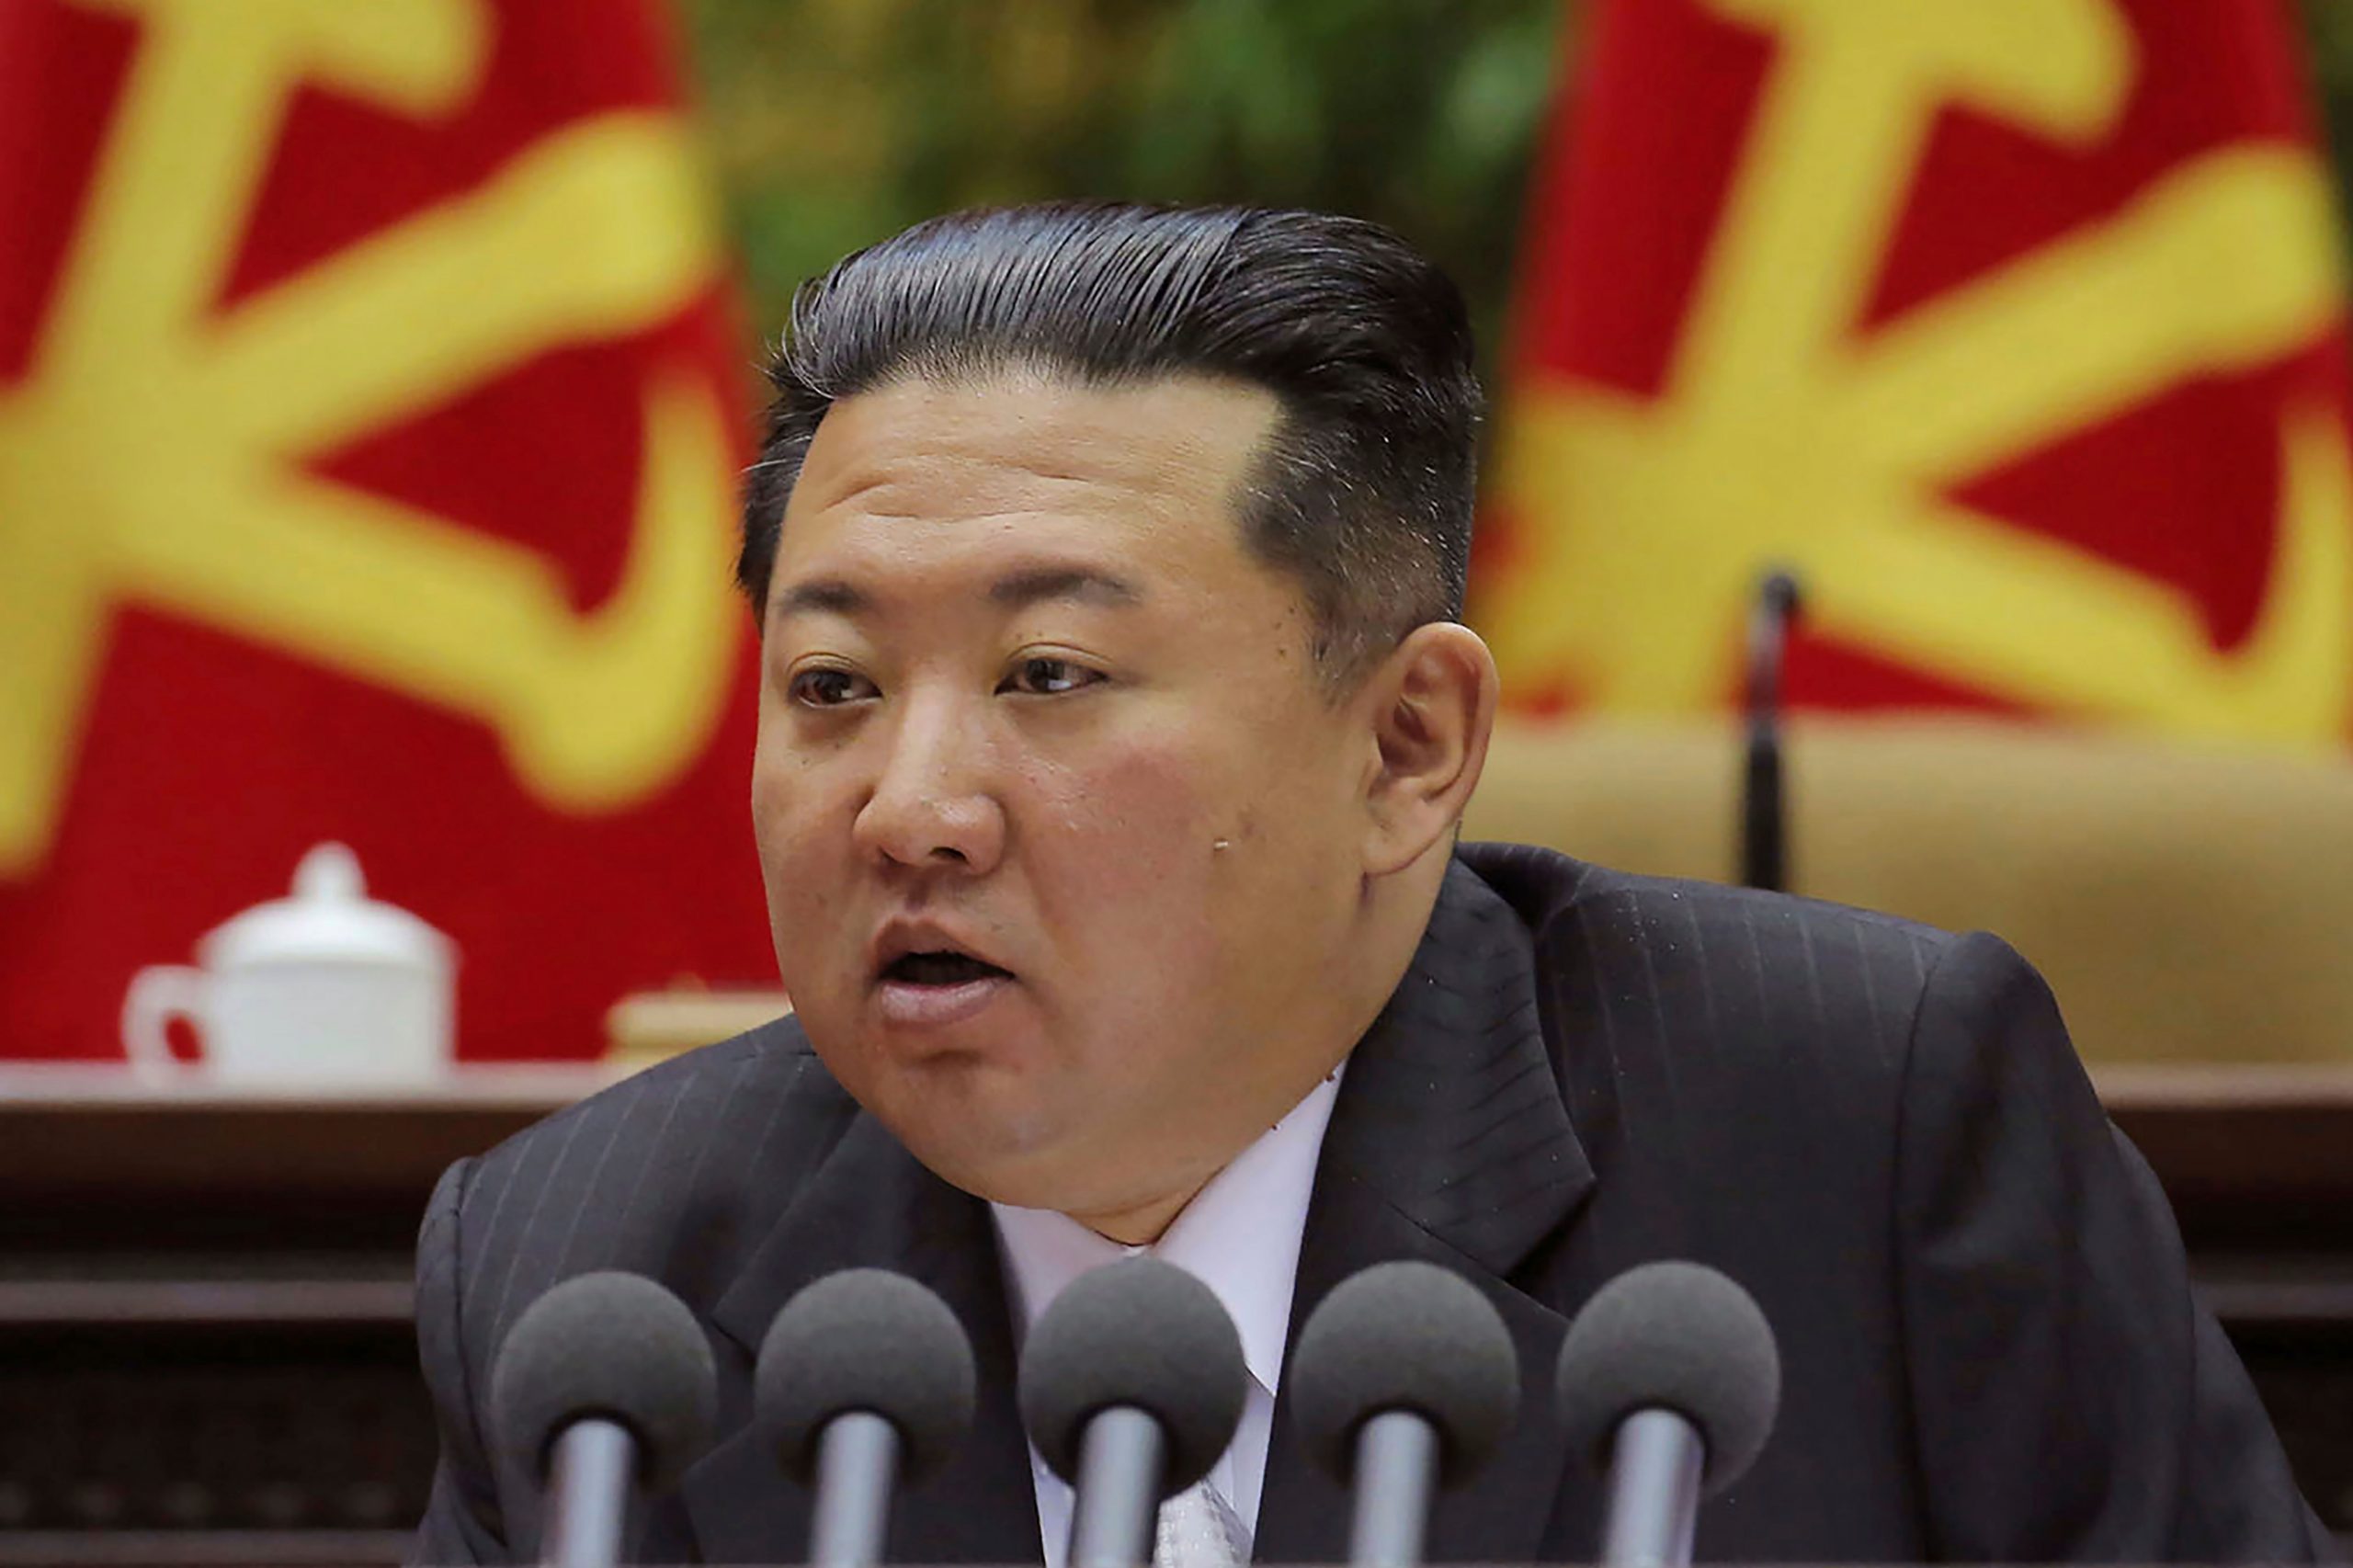 Amid fight against Covid, North Korea reports another infectious disease outbreak